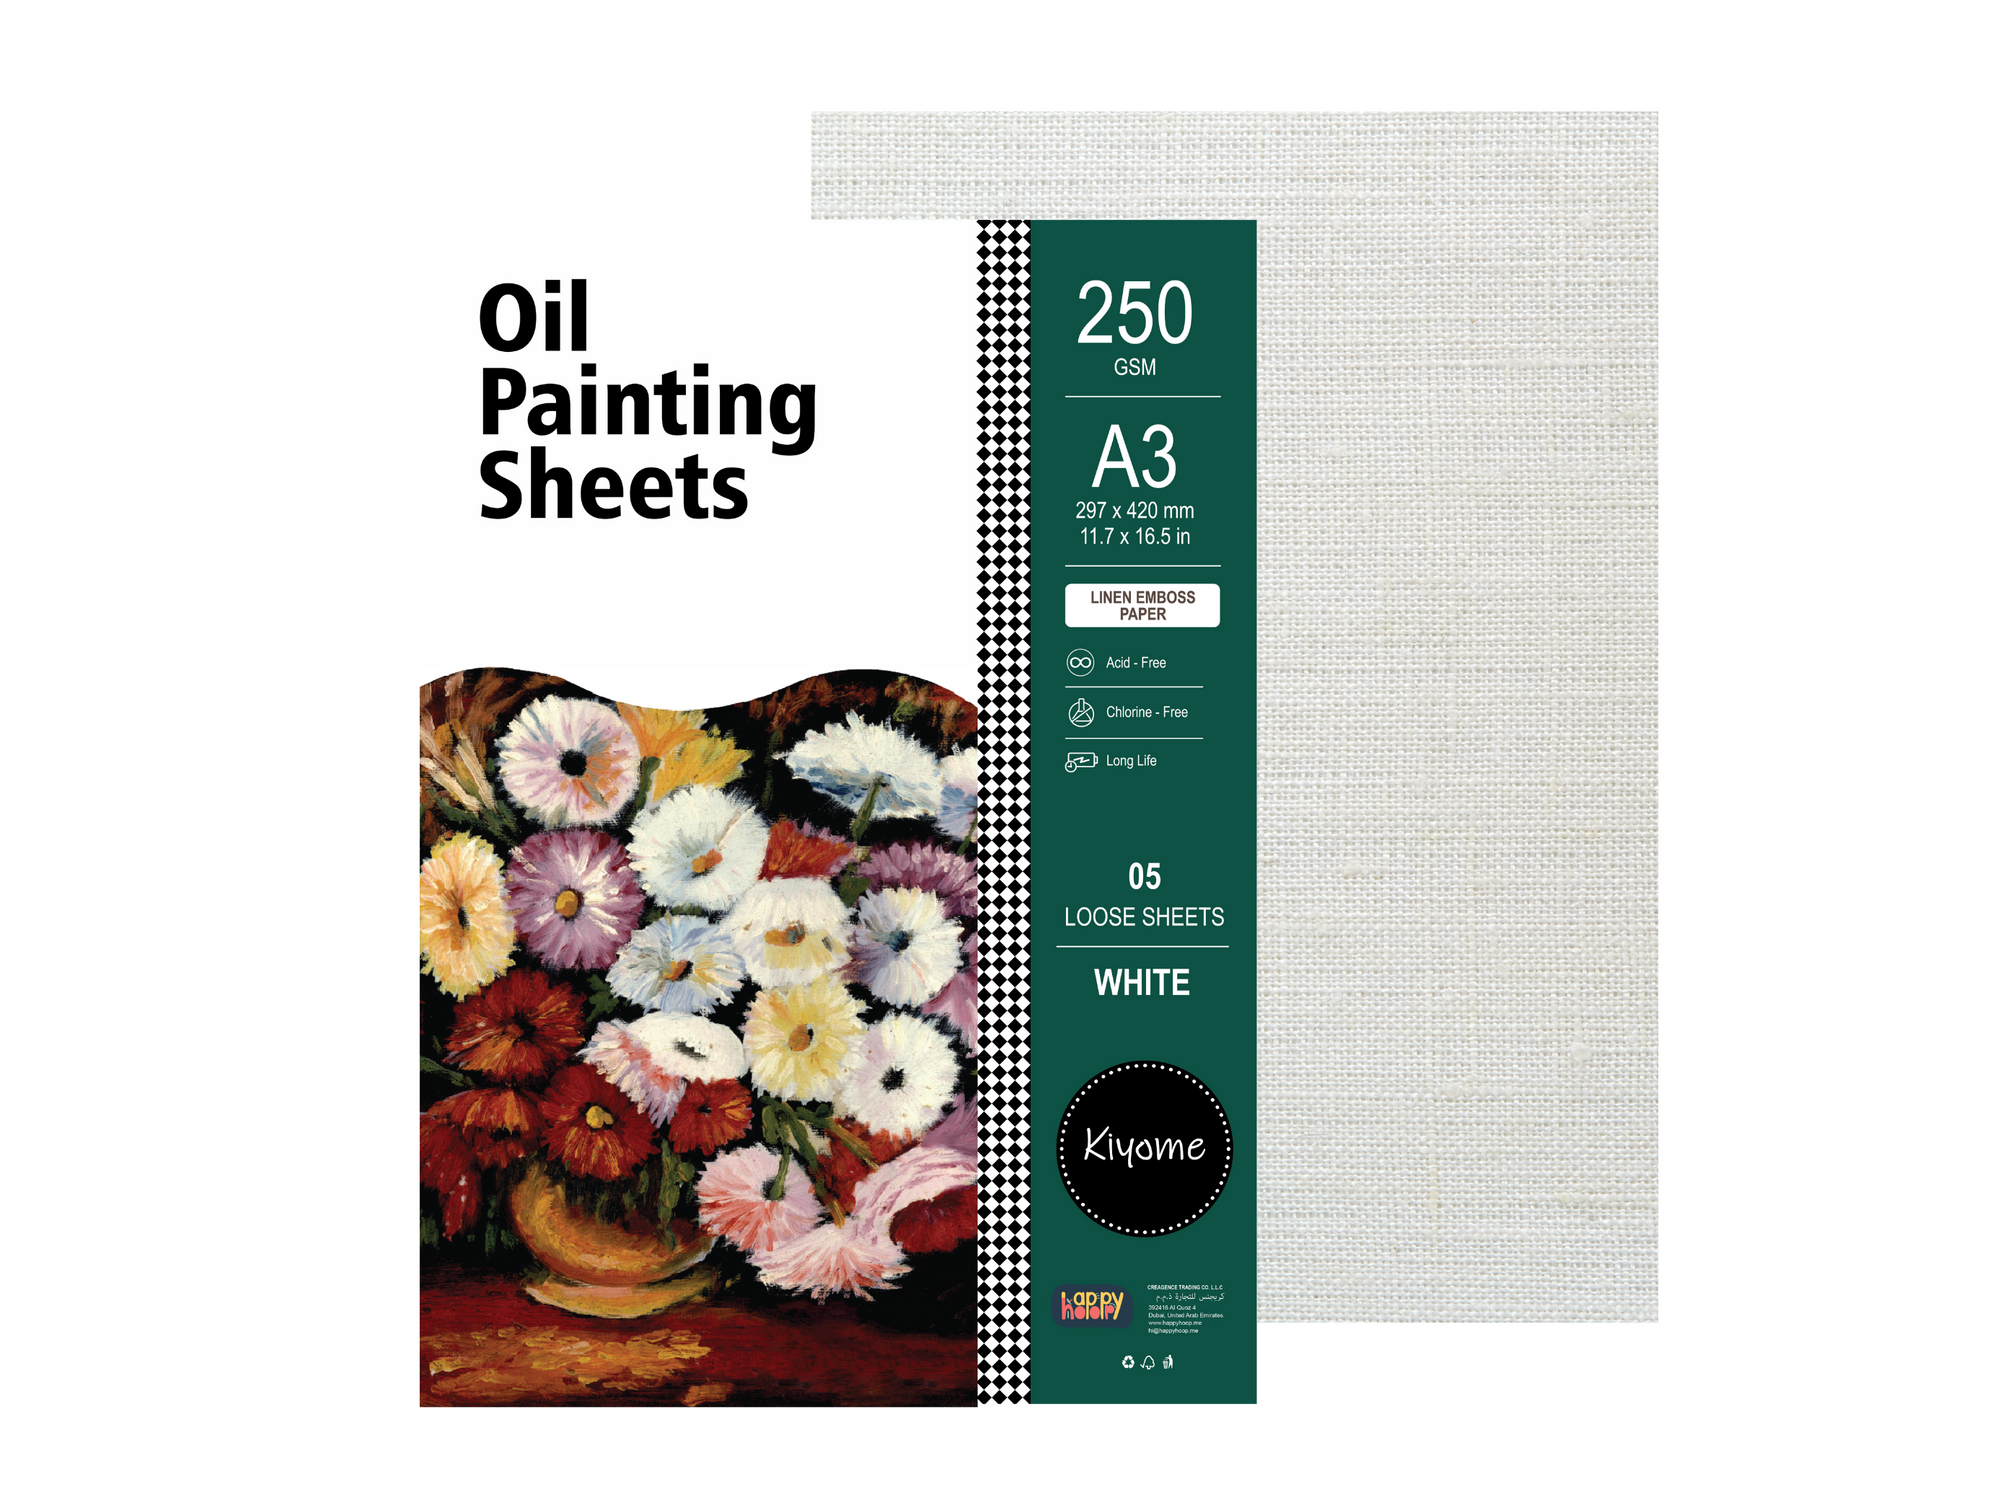 Kiyome Oil Painting Sheets | 250 GSM | A3 | 5 Sheets